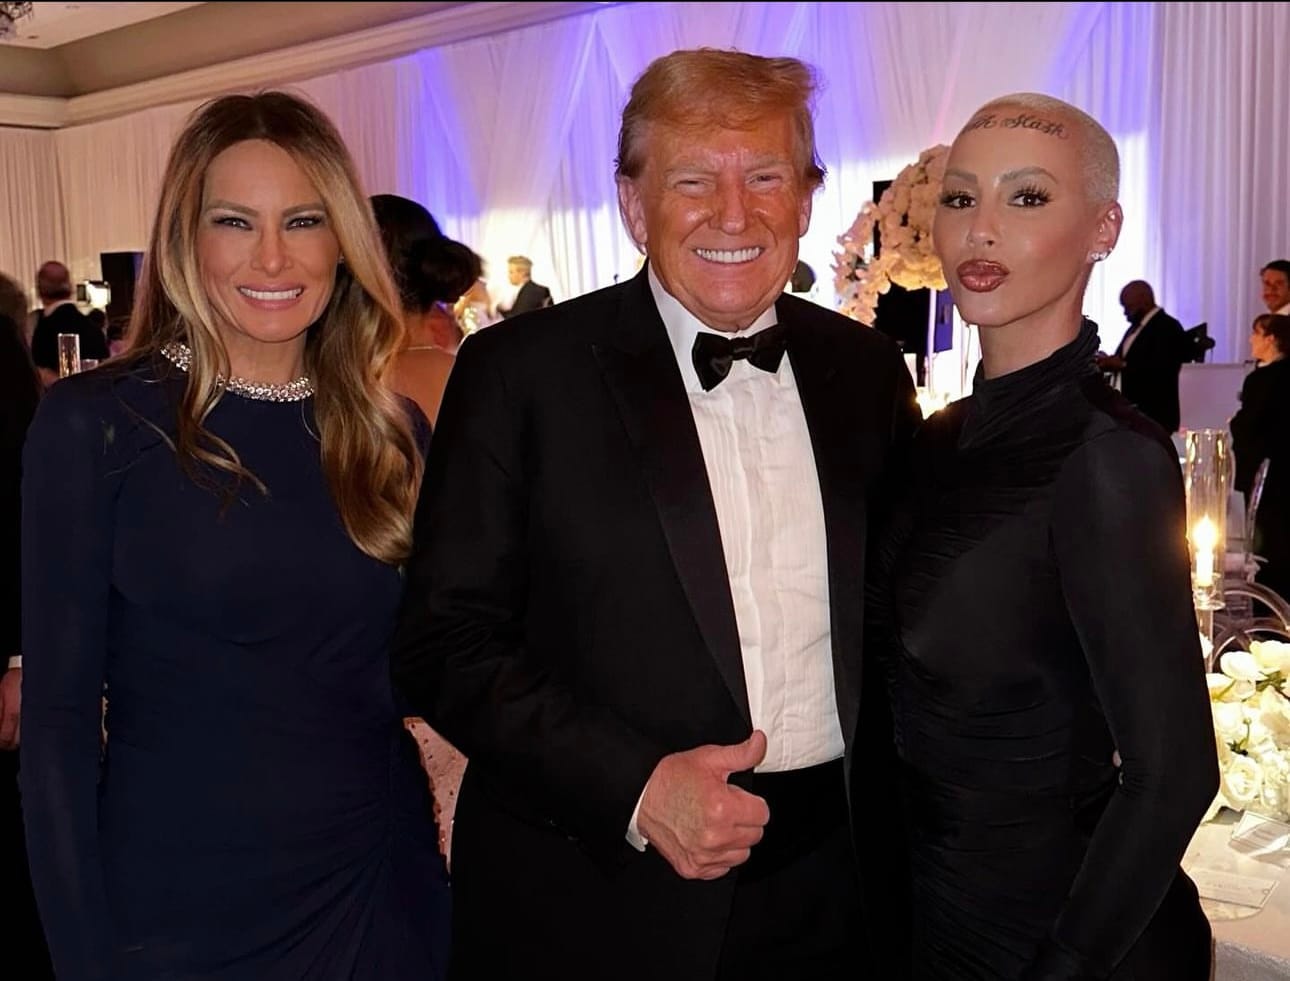 Amber Rose Shows Support for Trump 2024 Campaign with Instagram Post